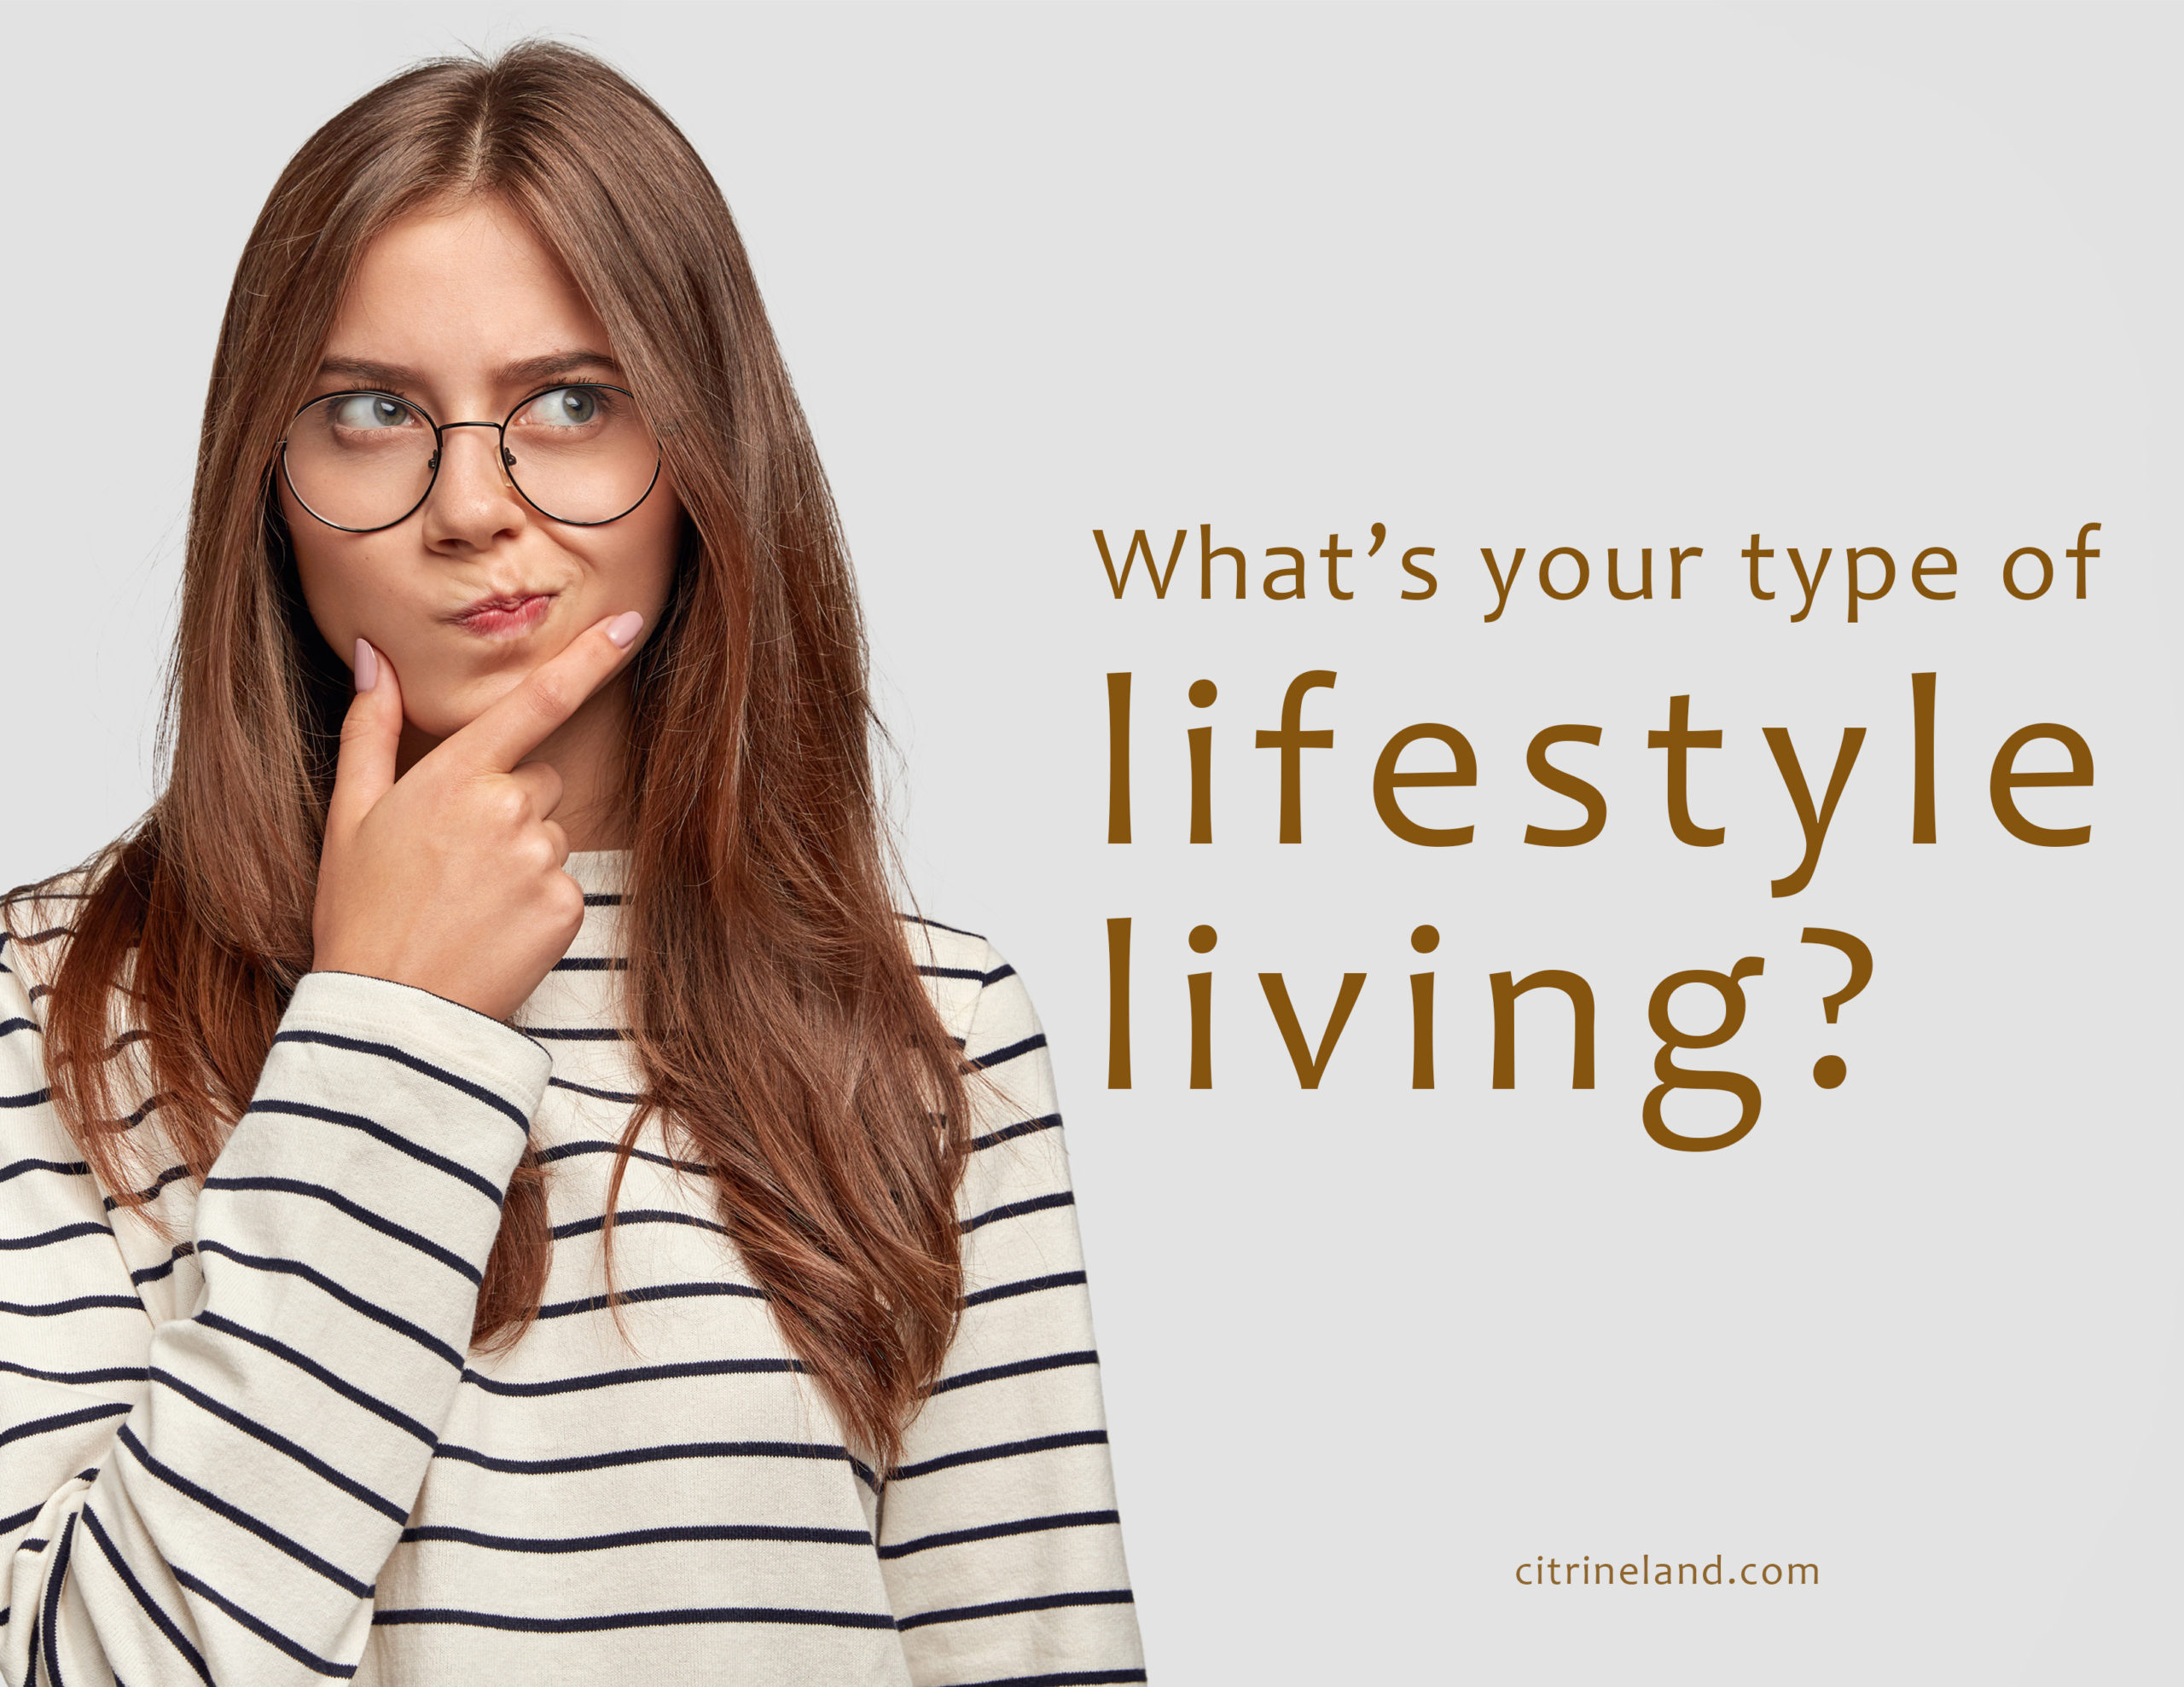 City Life Vs. Serene Life: Which Type of Lifestyle Fits You Best?